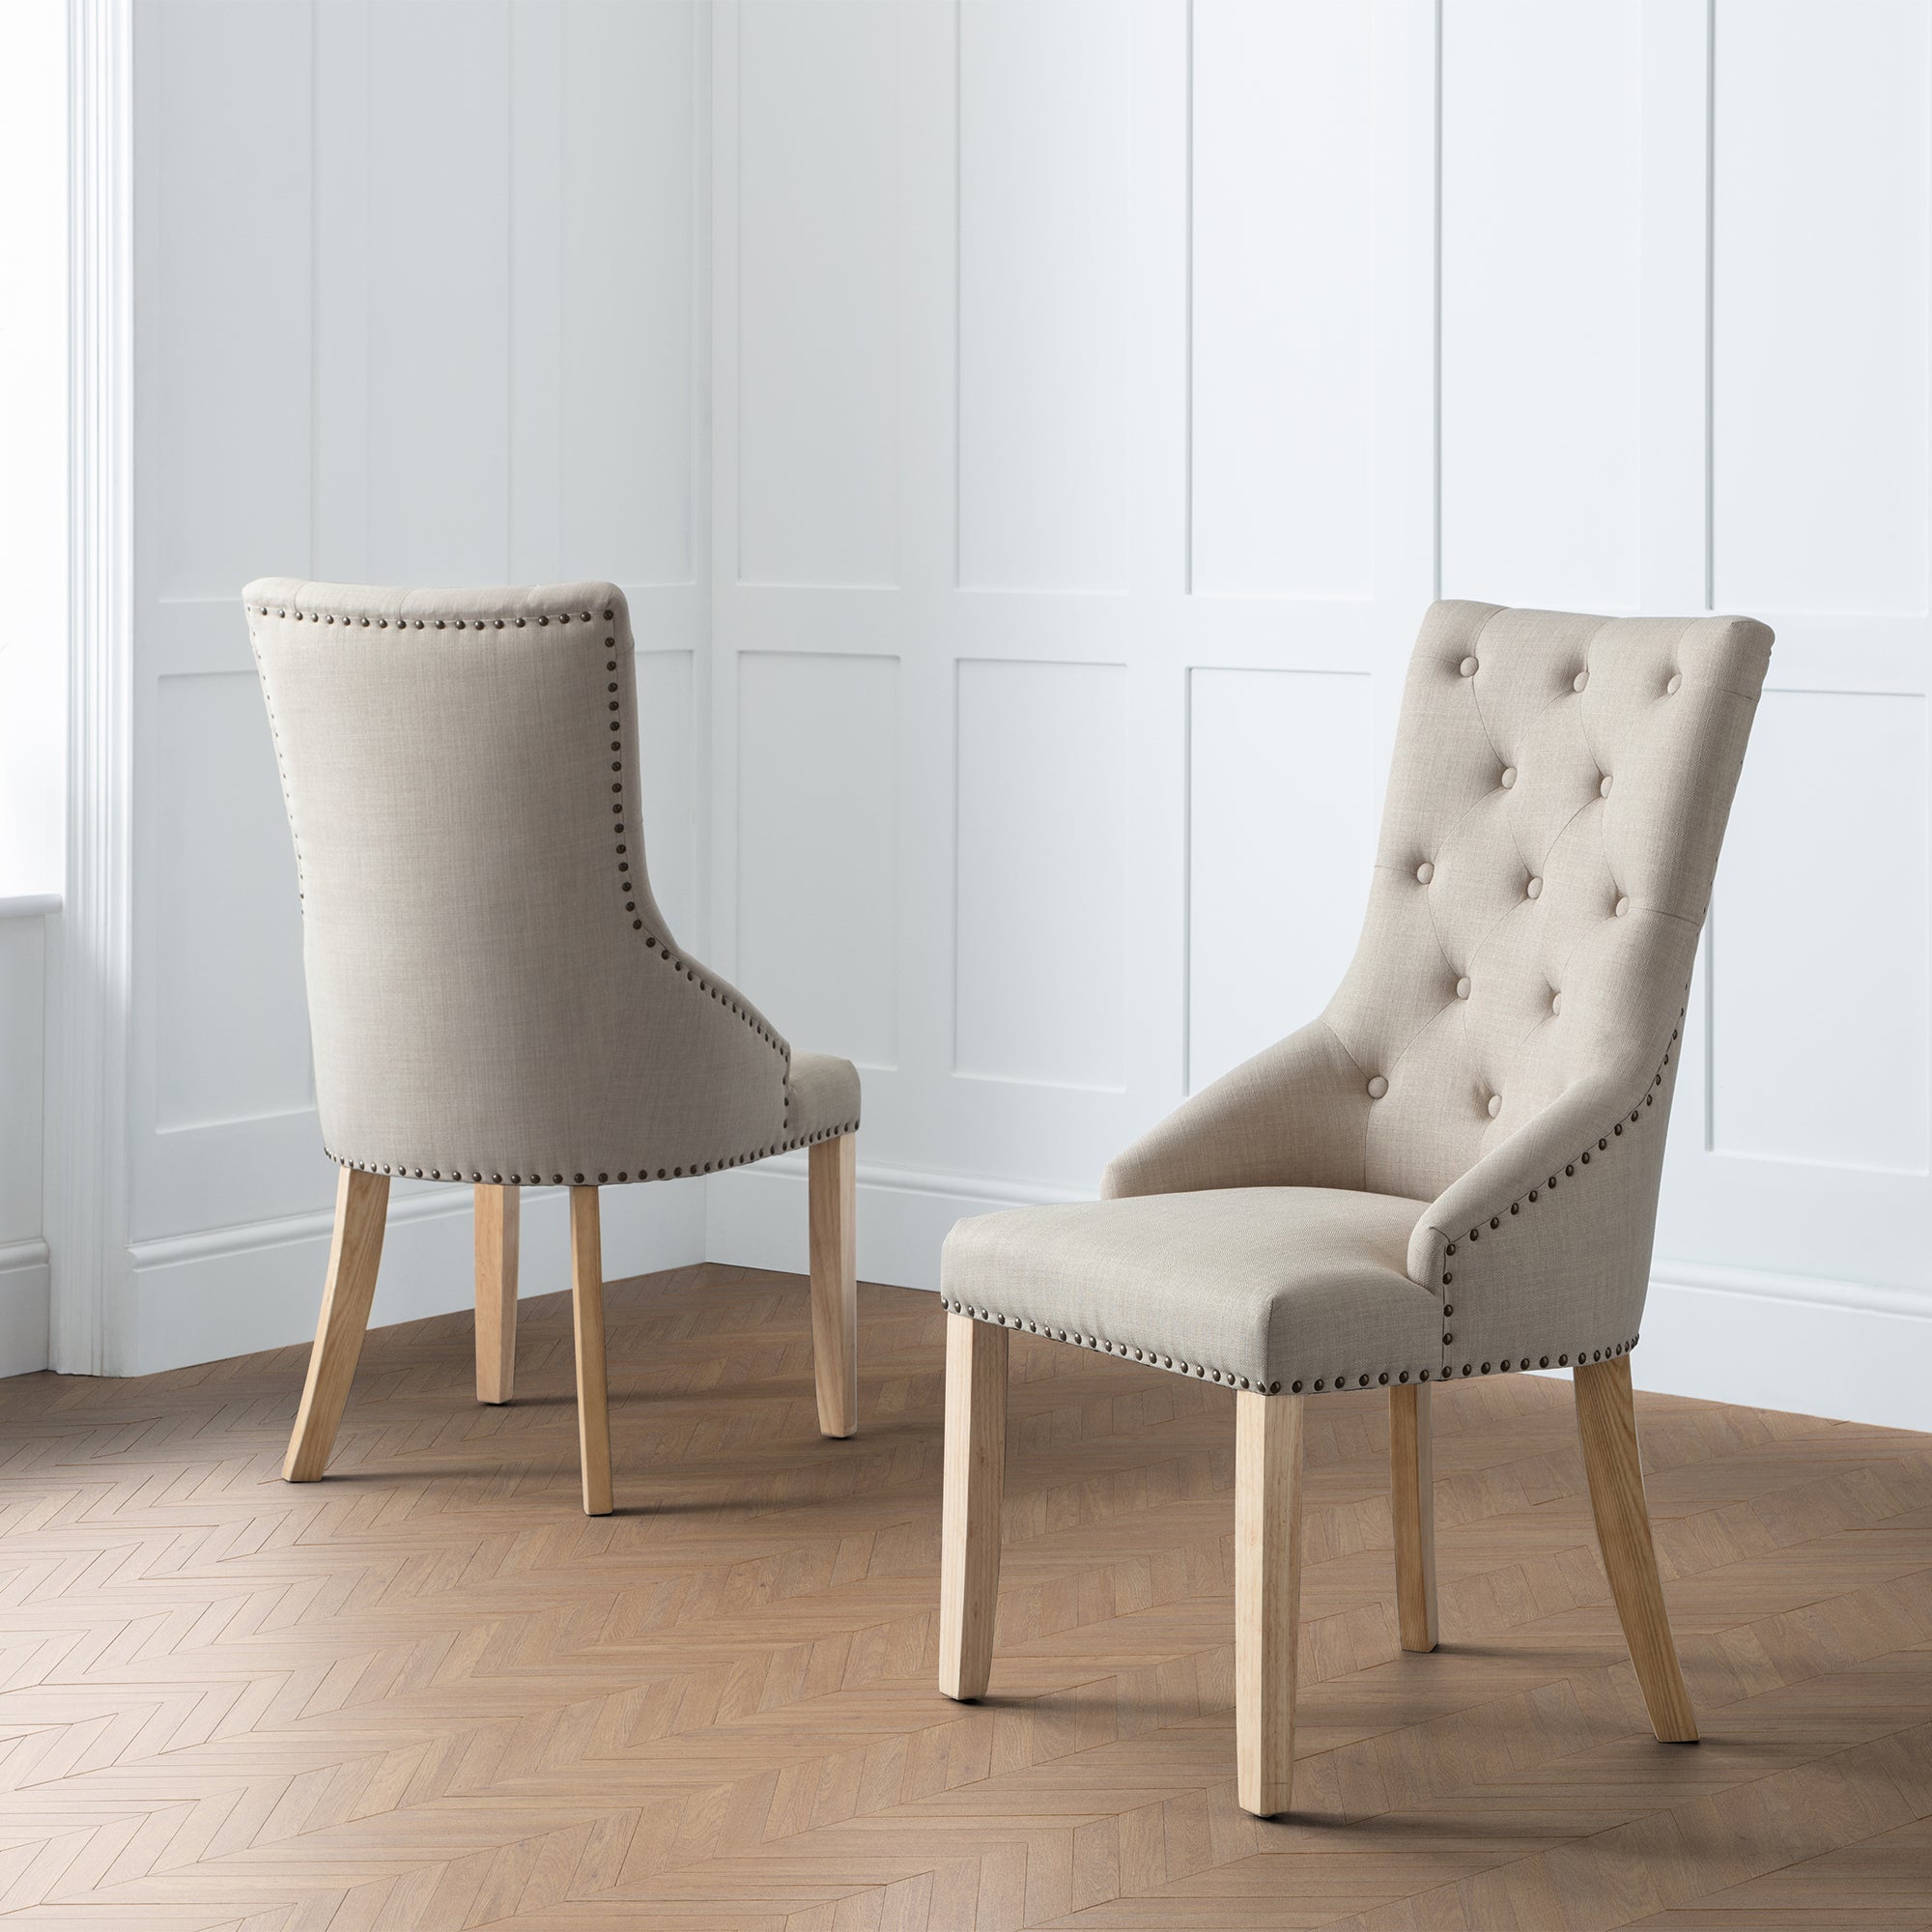 Loire Set Of 2 Button Back Dining Chairs, Linen